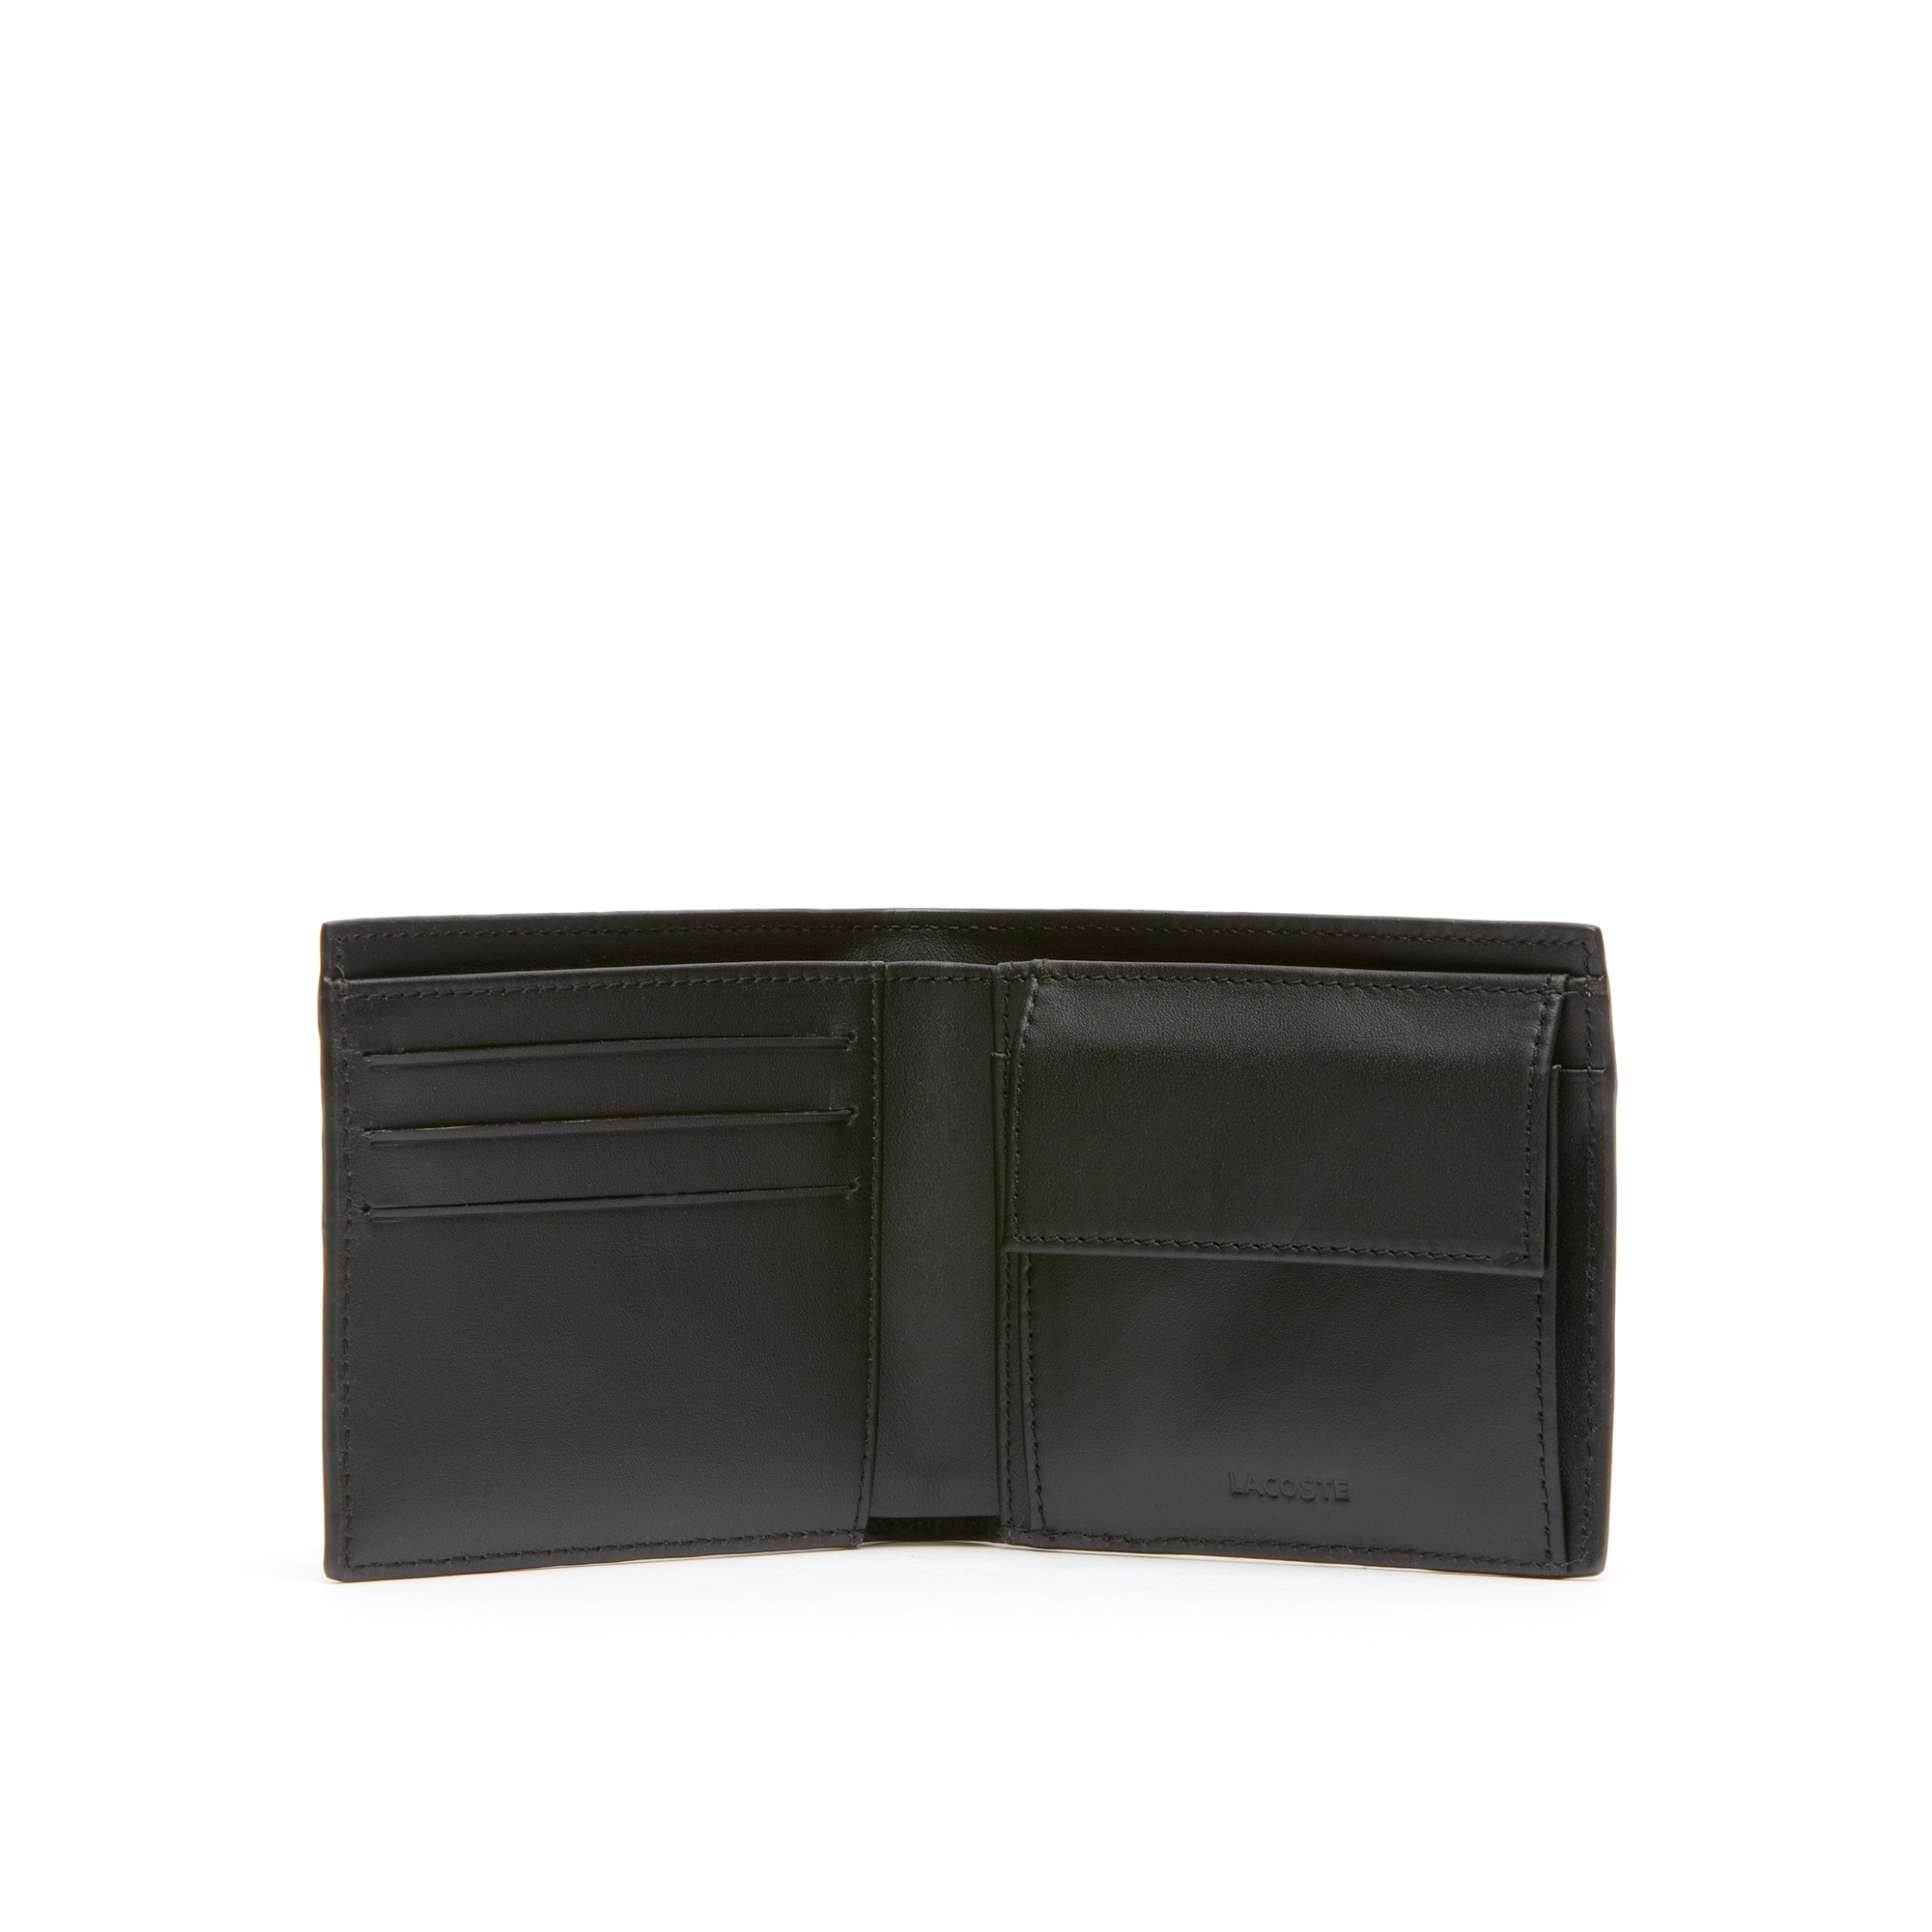 LACOSTE WALLET FG LARGE BILLFOLD AND COIN